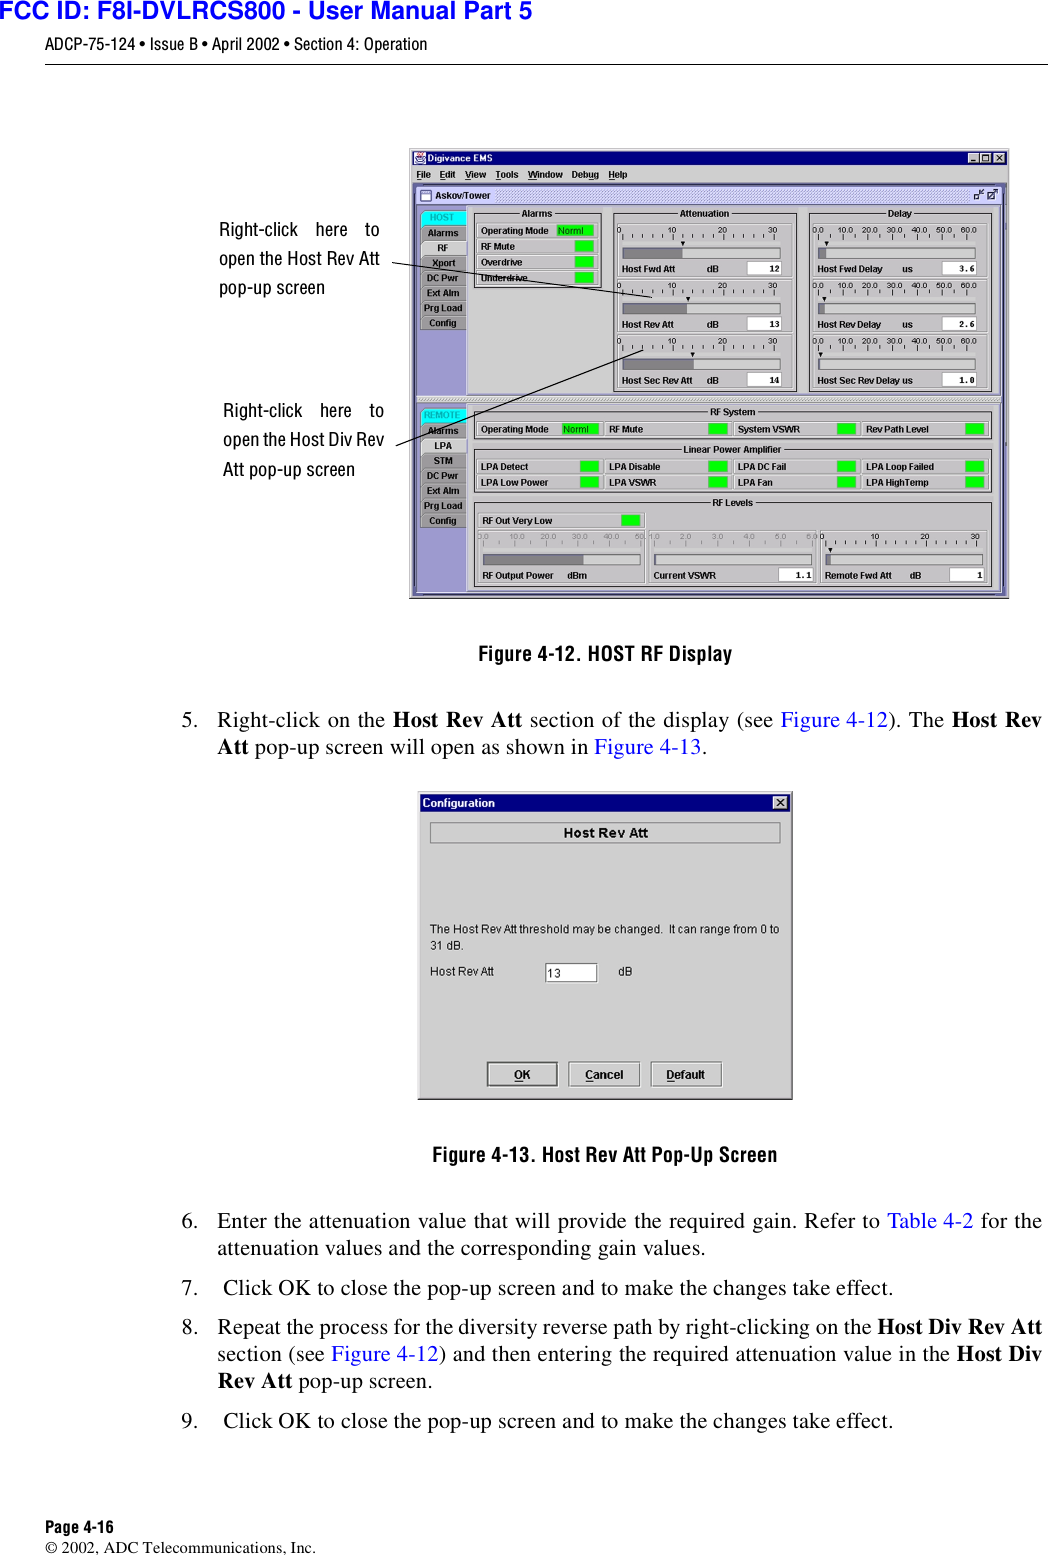 ADCP-75-124 • Issue B • April 2002 • Section 4: OperationPage 4-16©2002, ADC Telecommunications, Inc.Figure 4-12. HOST RF Display5. Right-click on the Host Rev Att section of the display (see Figure 4-12). The Host RevAtt pop-up screen will open as shown in Figure 4-13.Figure 4-13. Host Rev Att Pop-Up Screen6. Enter the attenuation value that will provide the required gain. Refer to Table 4-2 for theattenuation values and the corresponding gain values.7. Click OK to close the pop-up screen and to make the changes take effect.8. Repeat the process for the diversity reverse path by right-clicking on the Host Div Rev Attsection (see Figure 4-12)and then entering the required attenuation value in the Host DivRev Att pop-up screen.9. Click OK to close the pop-up screen and to make the changes take effect.Right-click here toopen the Host Rev Attpop-up screenRight-click here toopen the Host Div RevAtt pop-up screenFCC ID: F8I-DVLRCS800 - User Manual Part 5